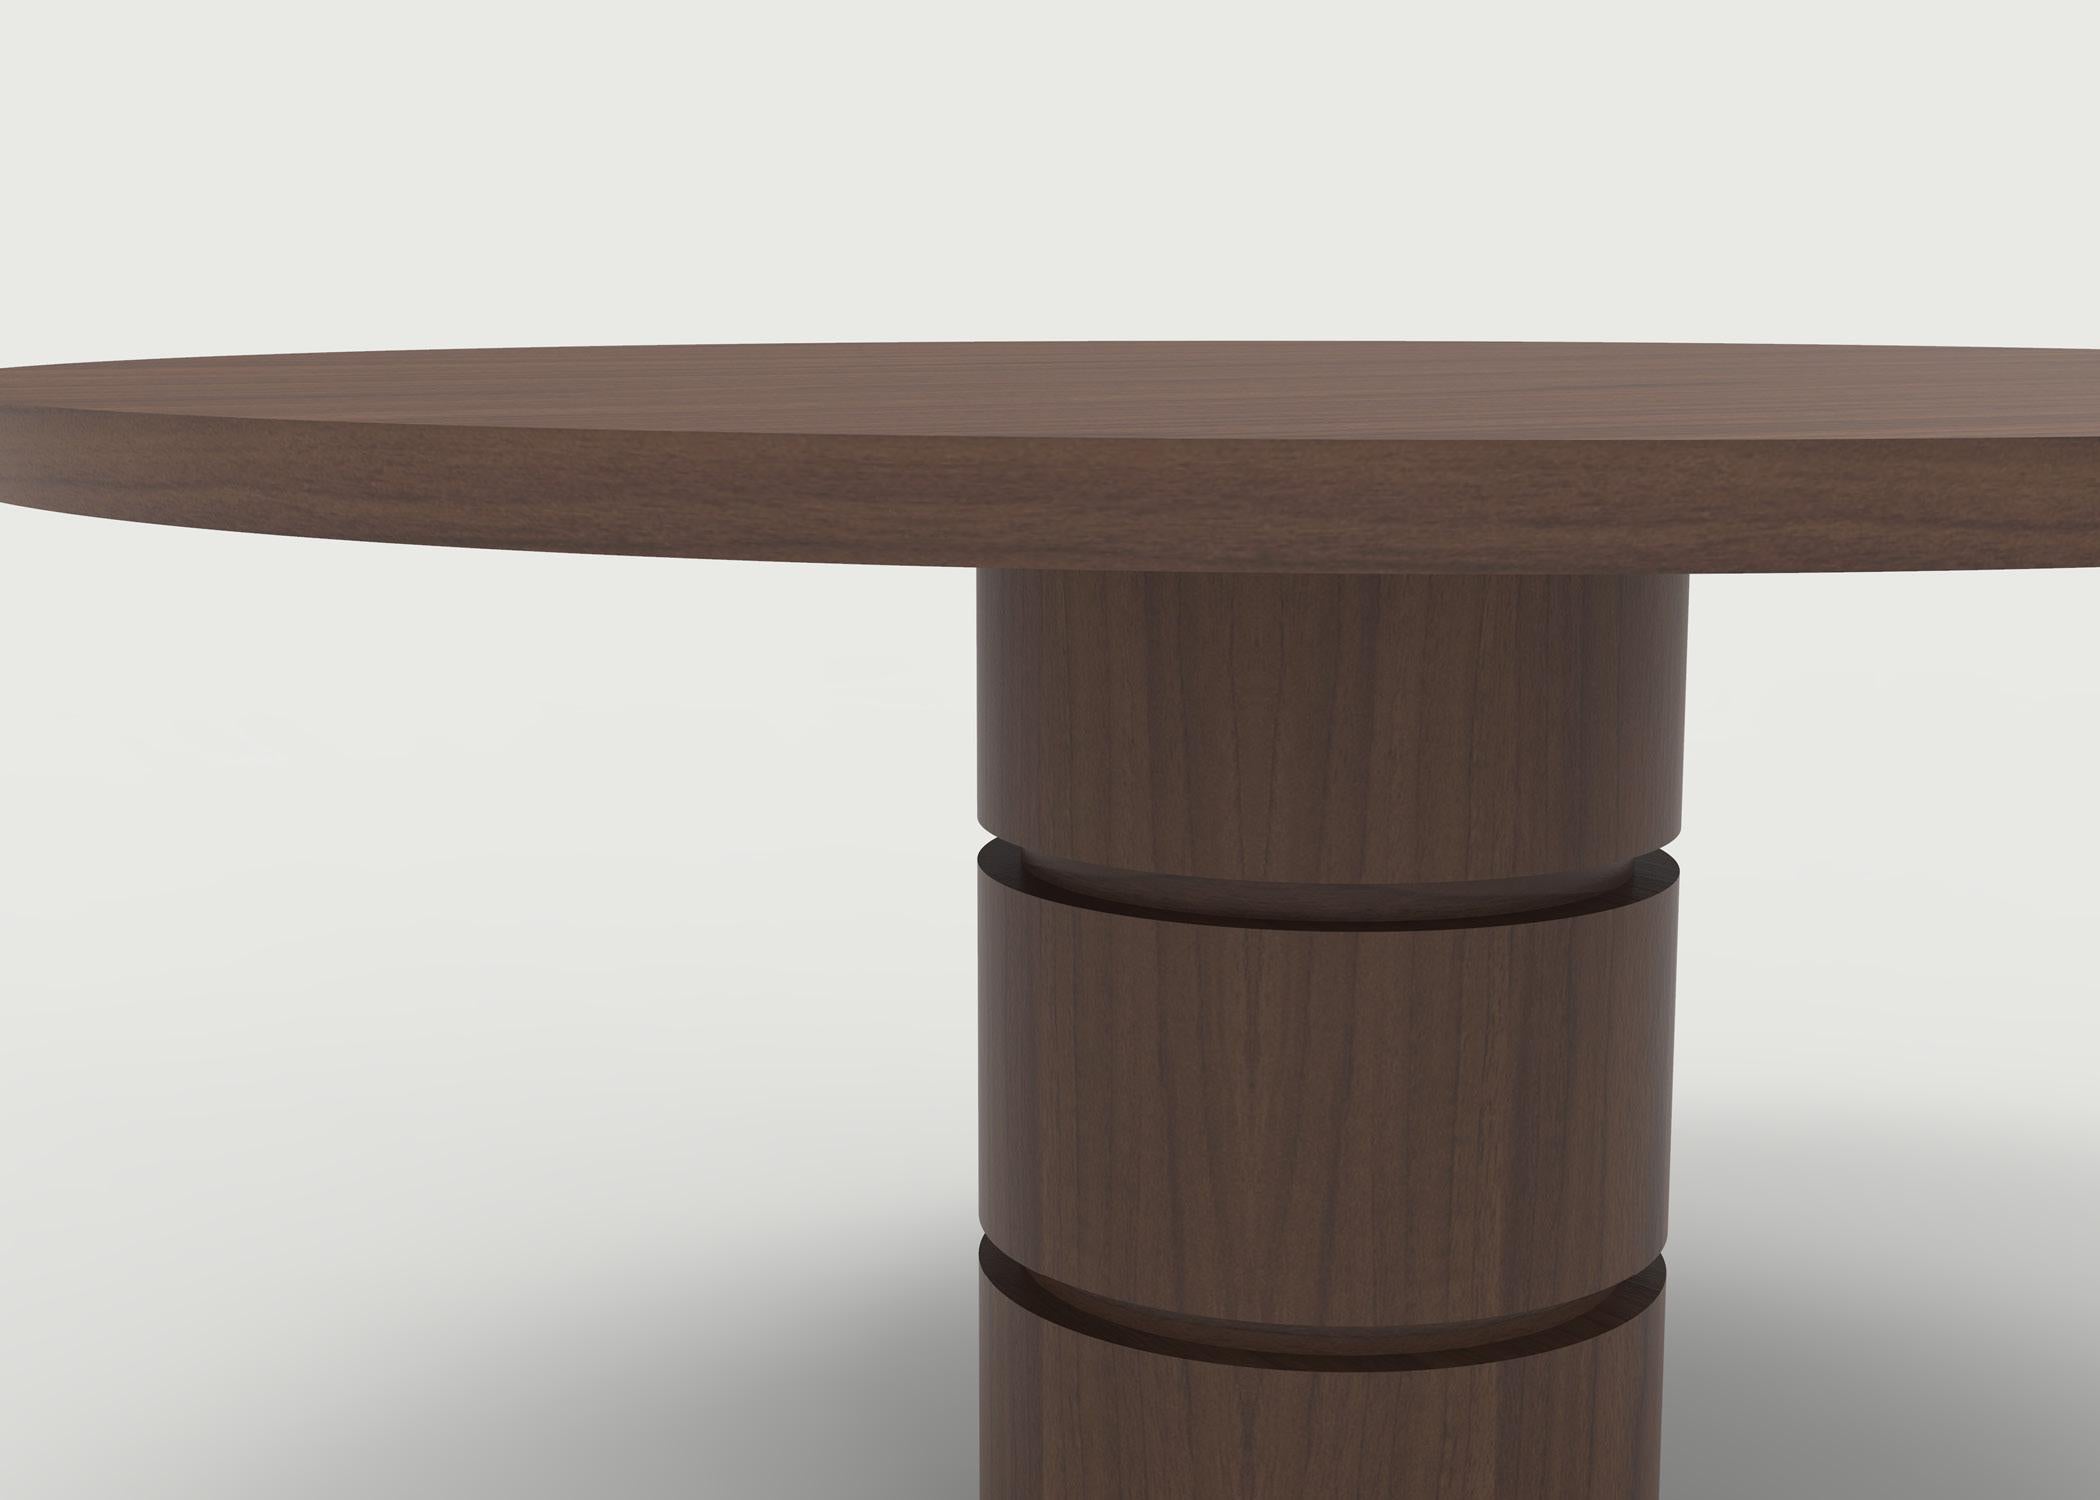 The Macon dining table shown in walnut wood with a solid top and special angled edge on top. The base is carved with special cut details to reveal an inside smaller base that can be made and finished in same or different wood and finish. All hand